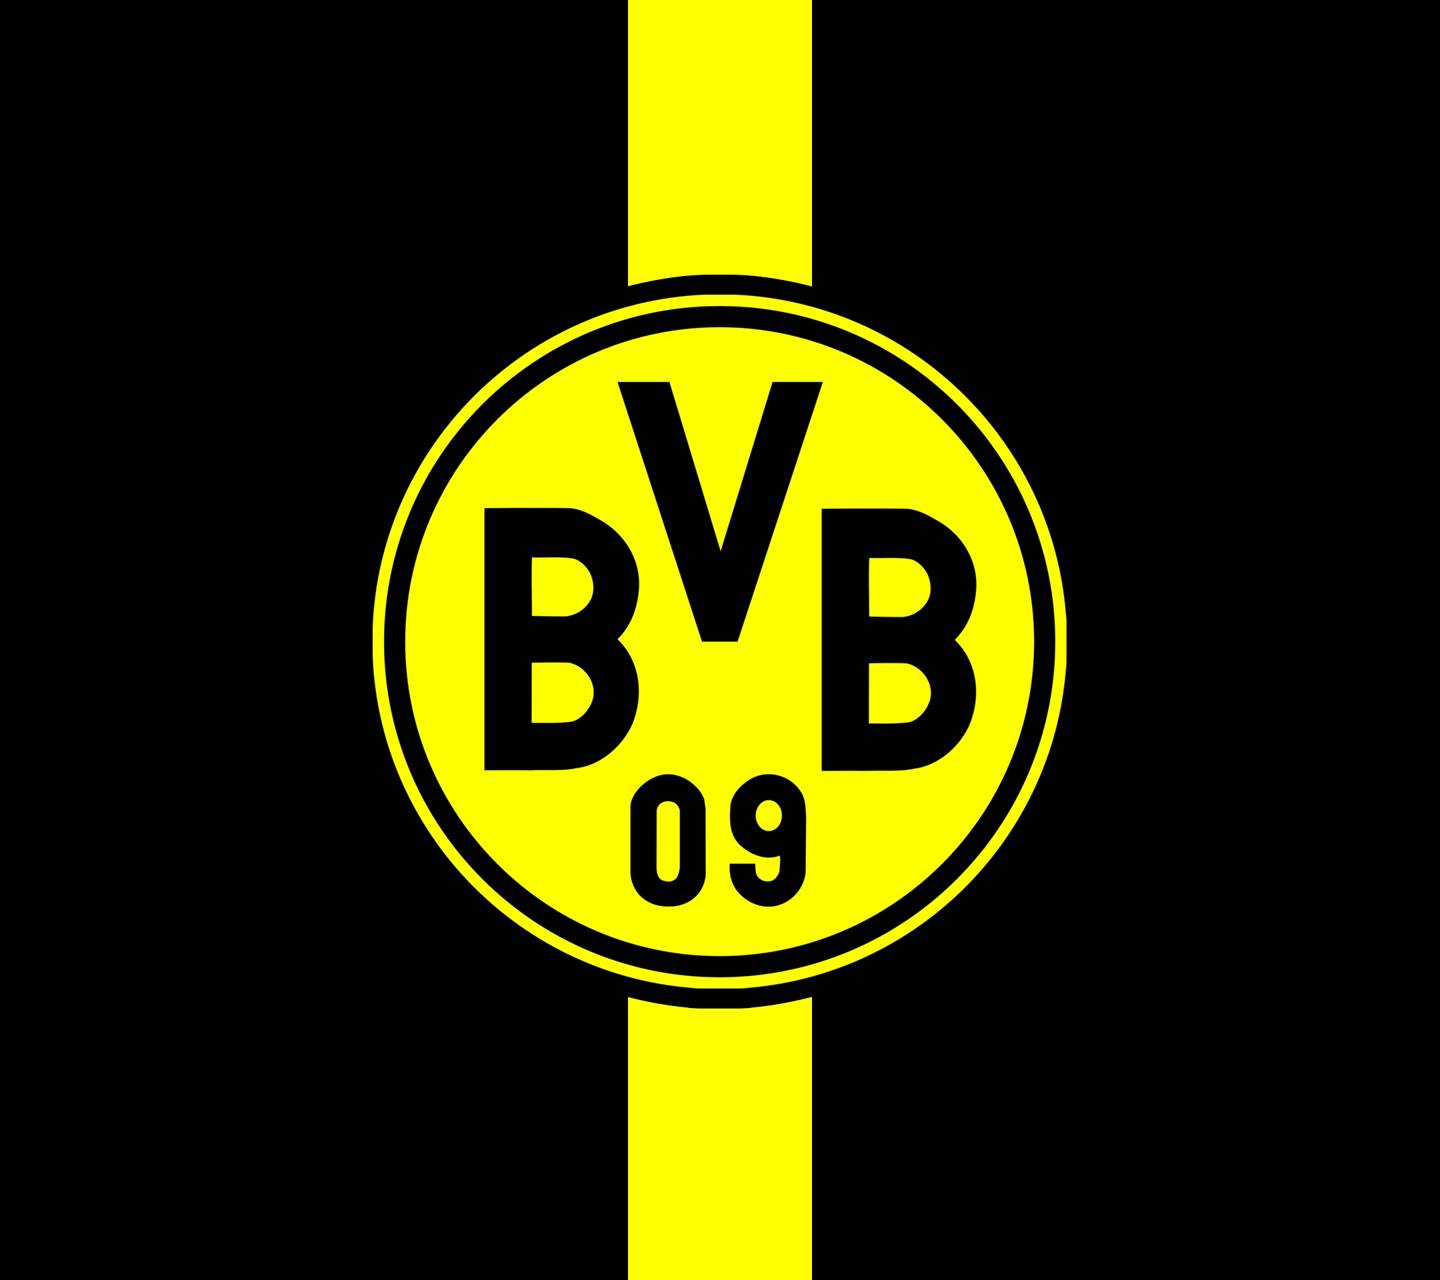 Download free bvb wallpaper for your mobile phone downloaded